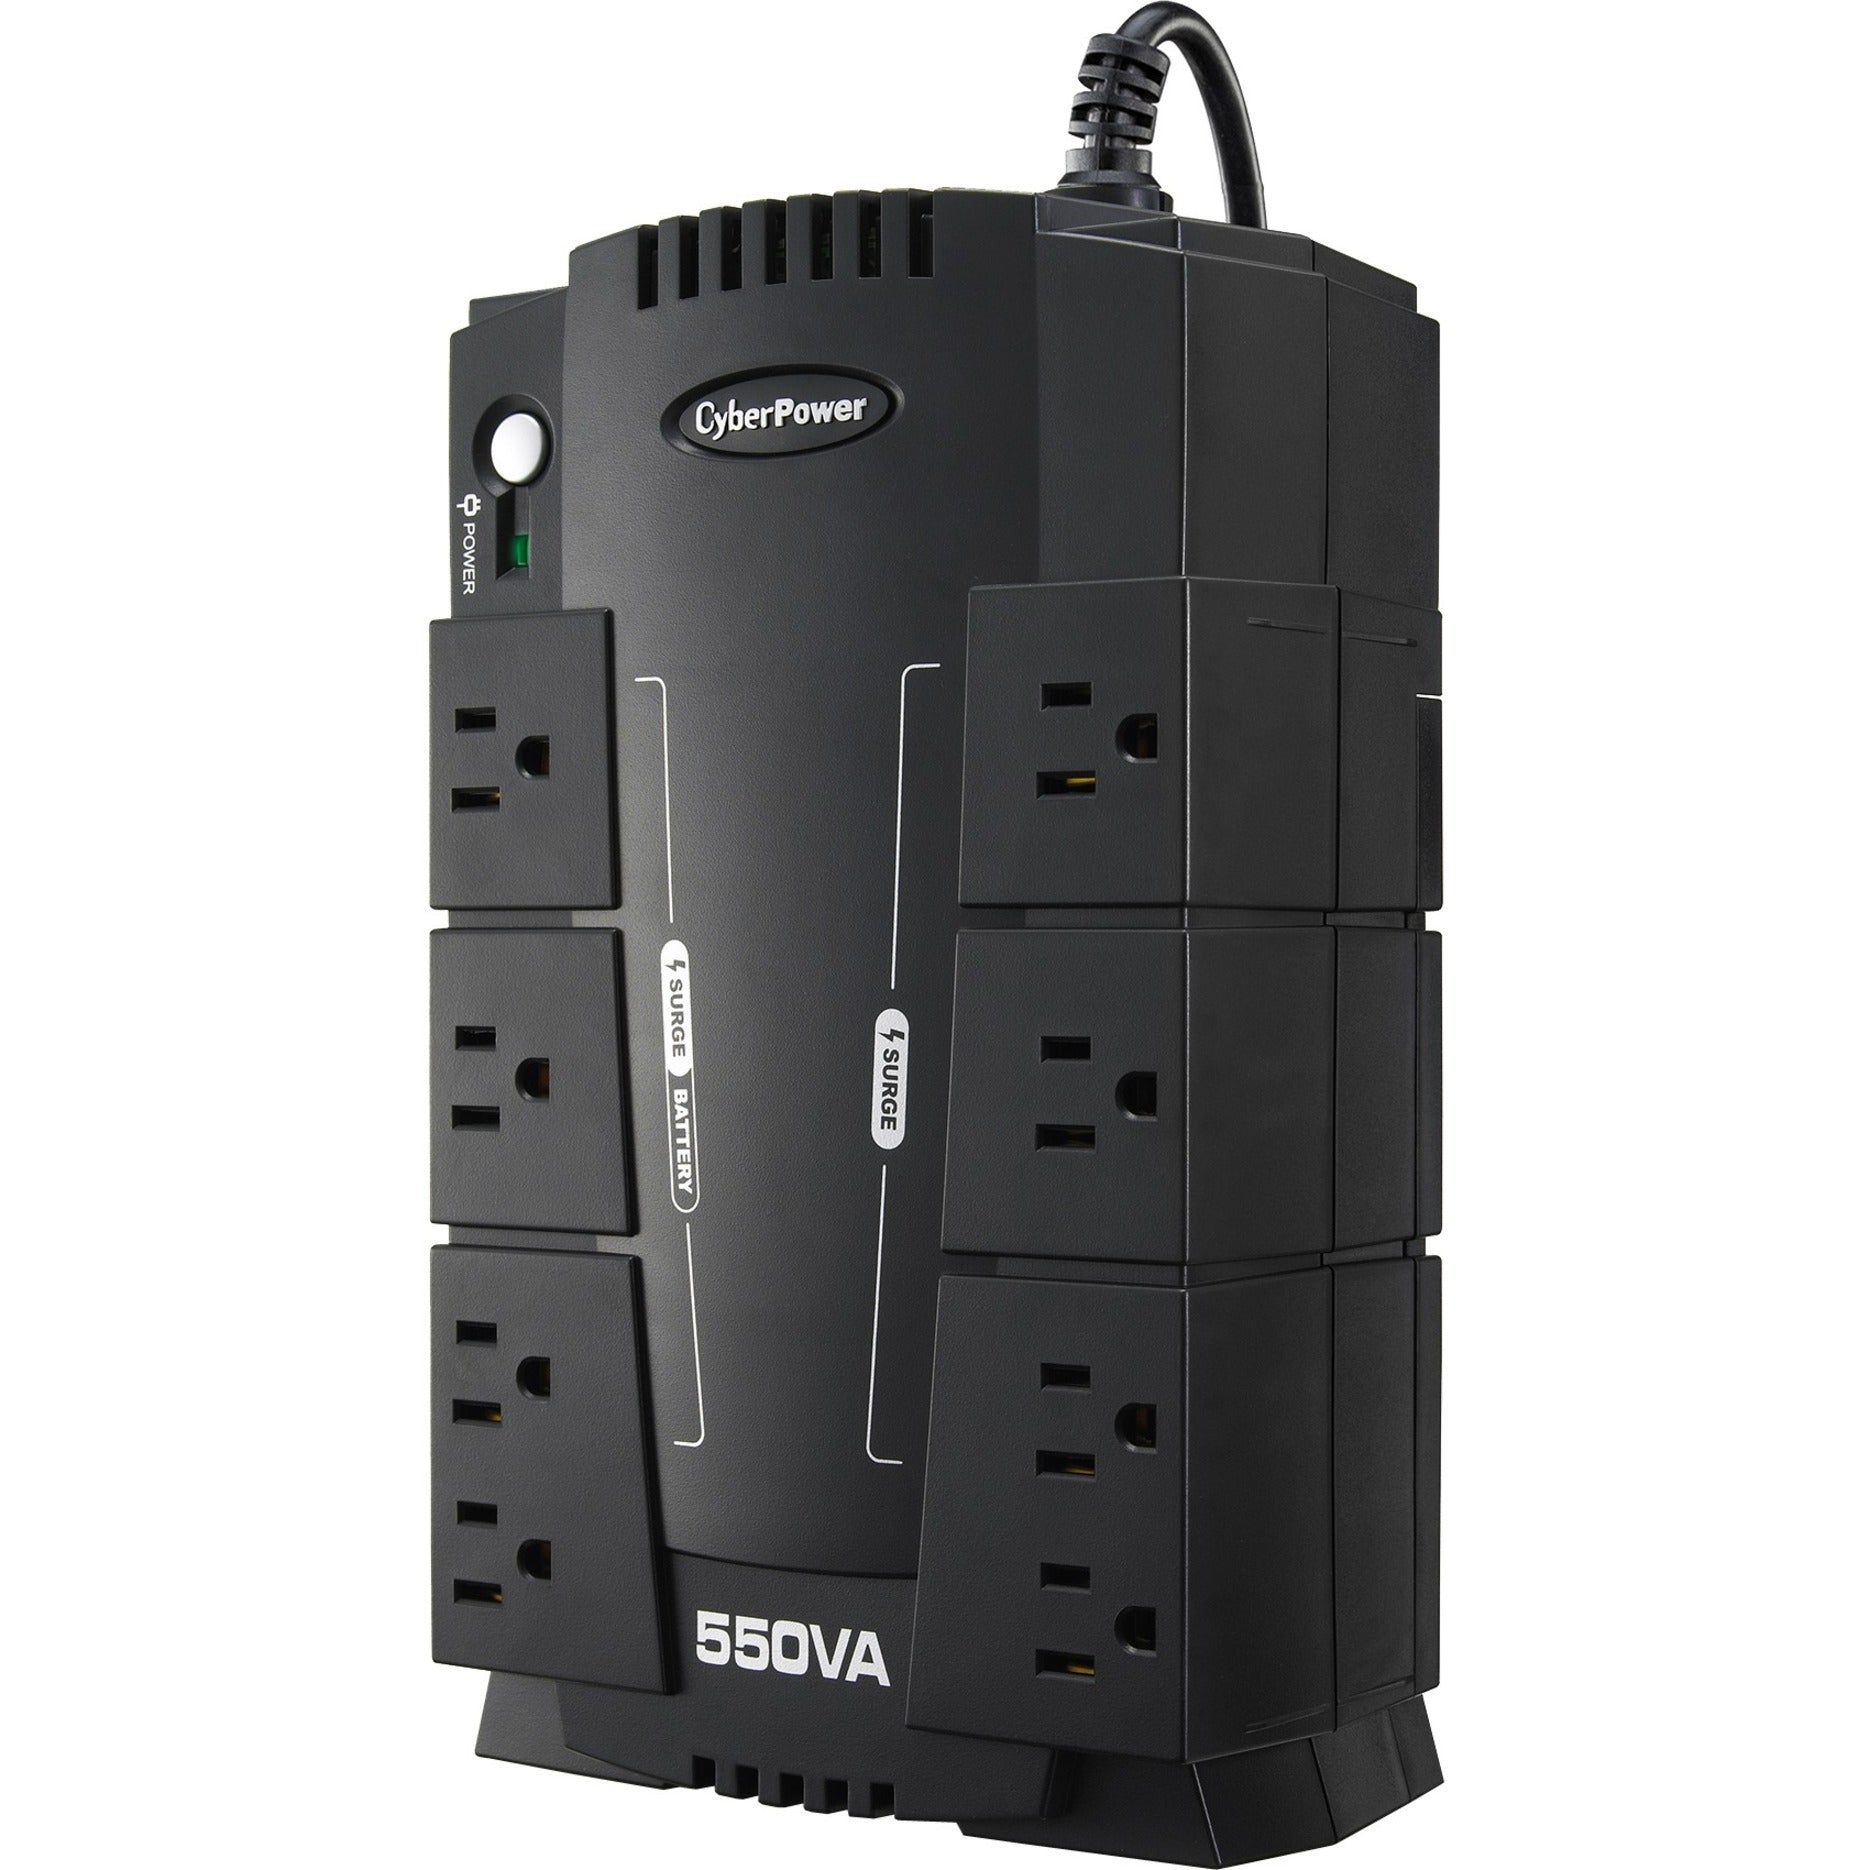 CyberPower CP550SLG Standby UPS, 550 VA Desktop Power Backup, 2 Minute Full Load Backup, Energy Efficient